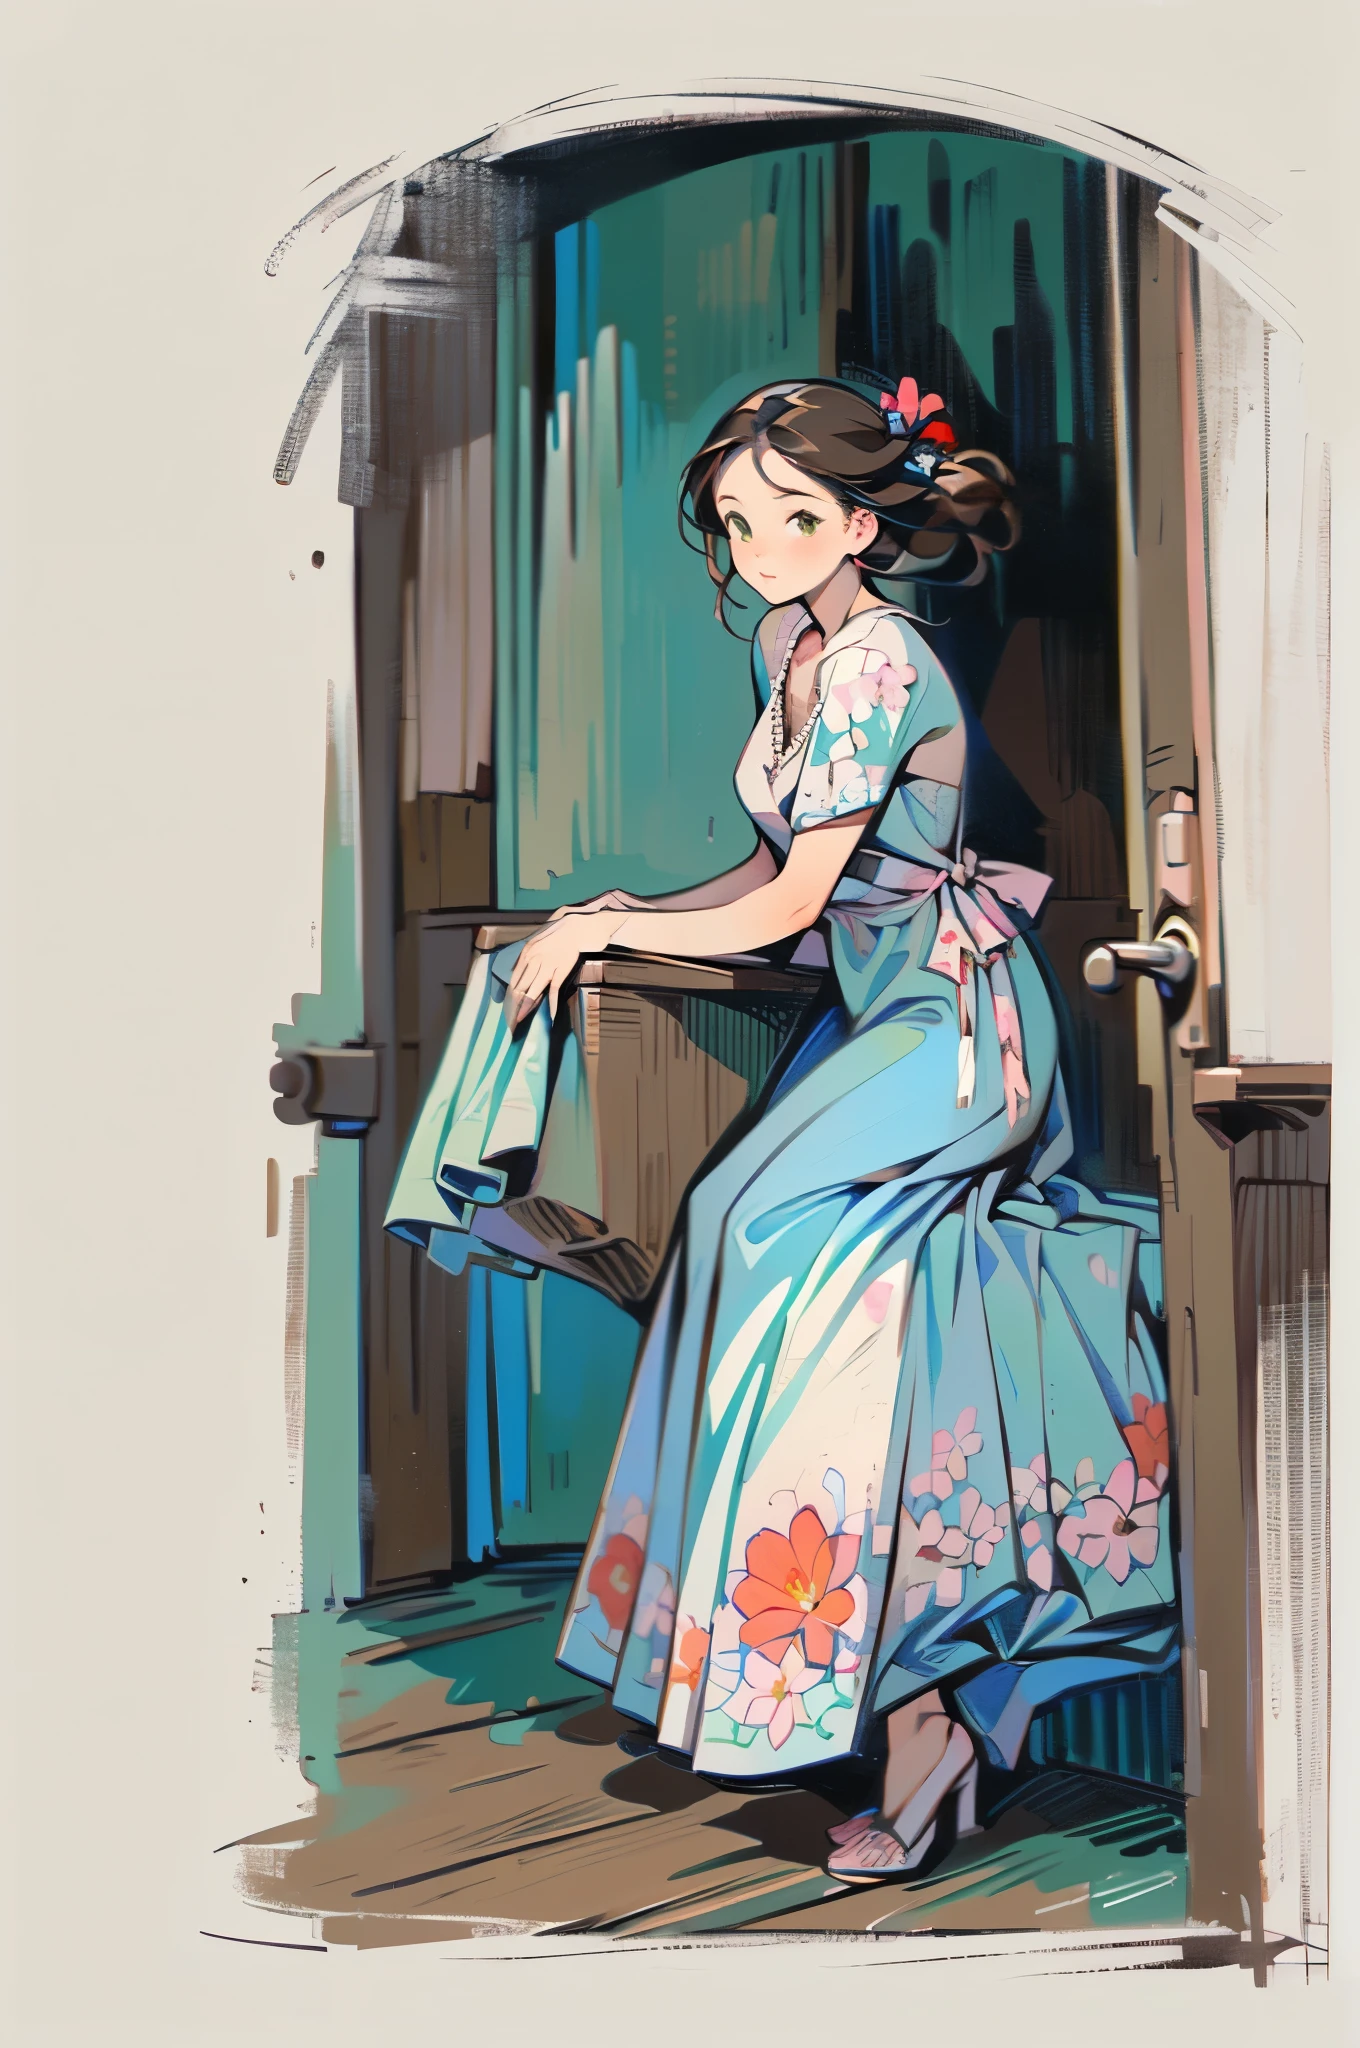 (Impressionismus1:1.0) soft pastel palette (Weiß, Rosa, Rot, Grün, braun) Aquarell (pensive pretty Young woman long dark braun hair in a floral print dress lace edges 1.0) (sitting on a stone door step leaning against an old braun wooden door 1.0).